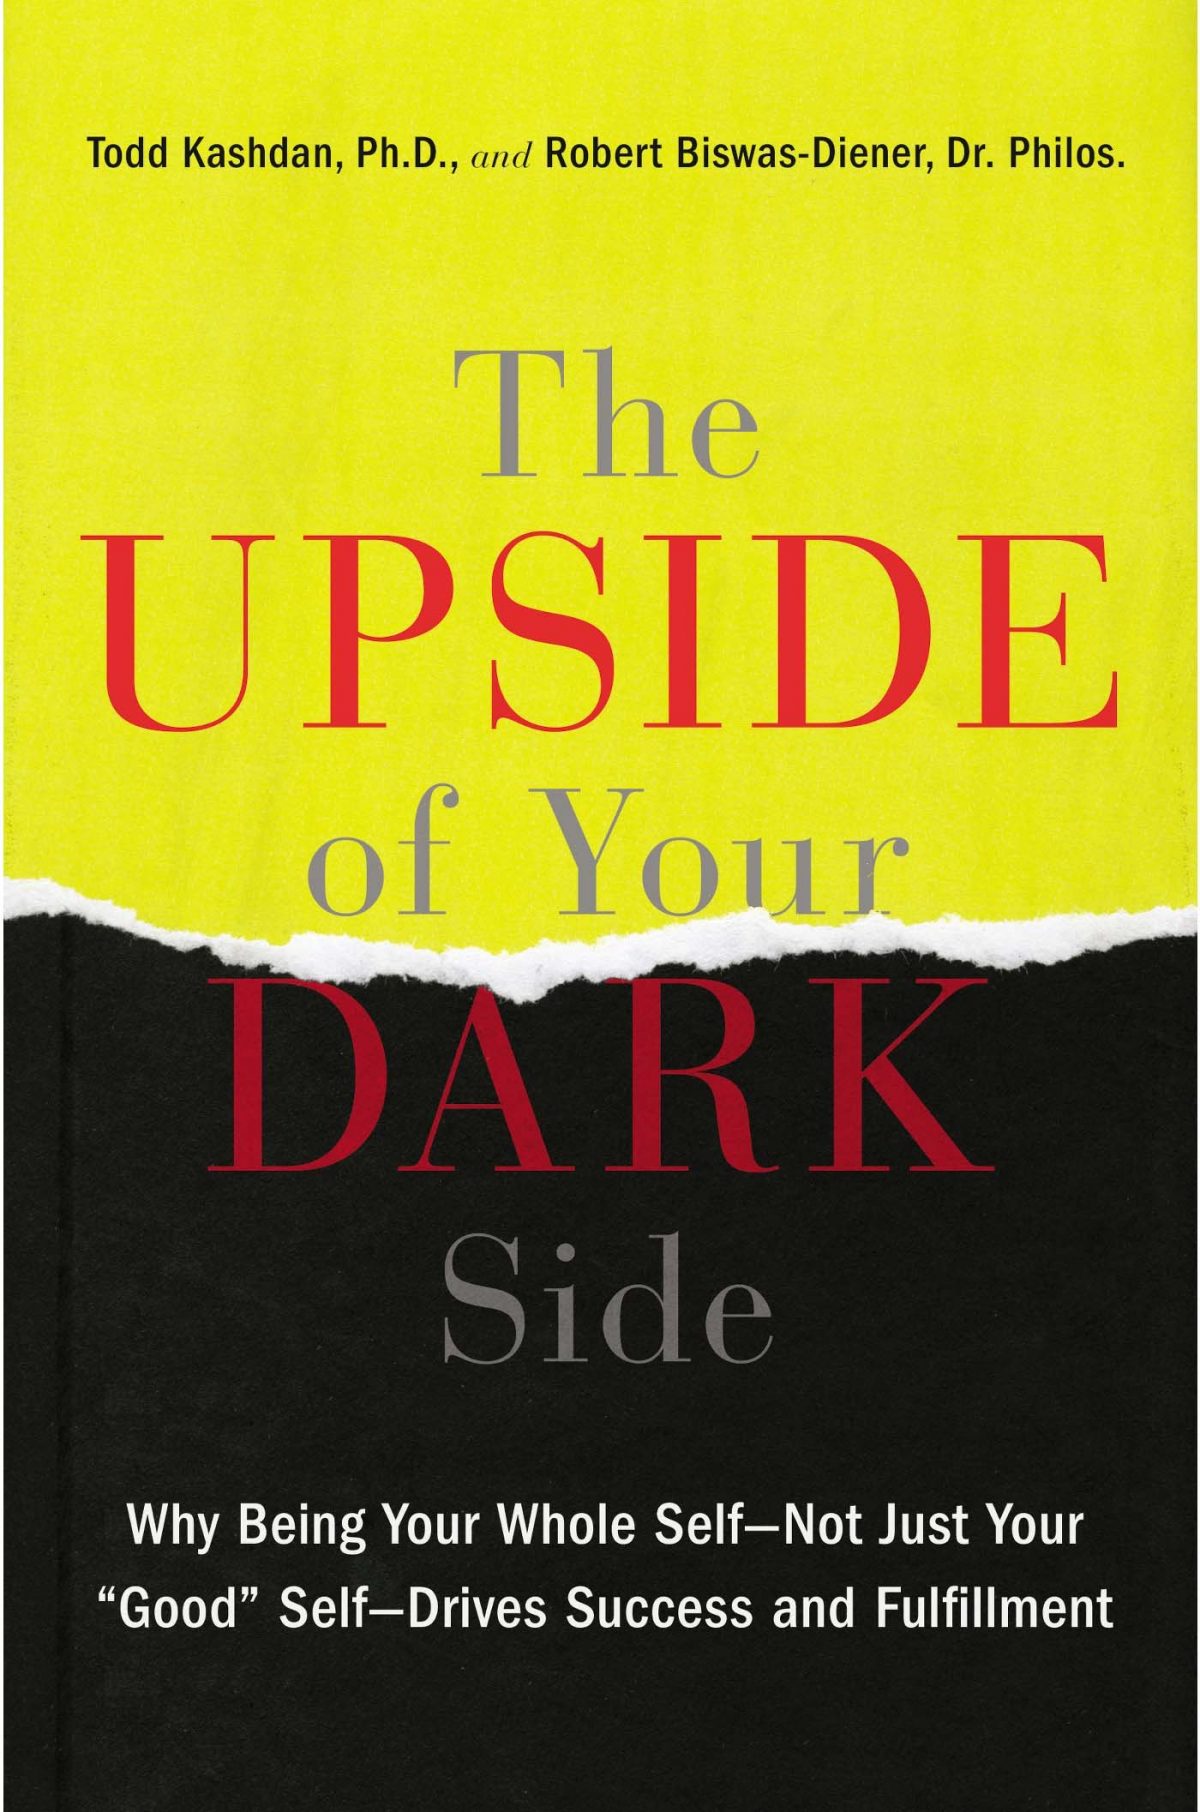 Your dark side is your deepest source for joy, contribution